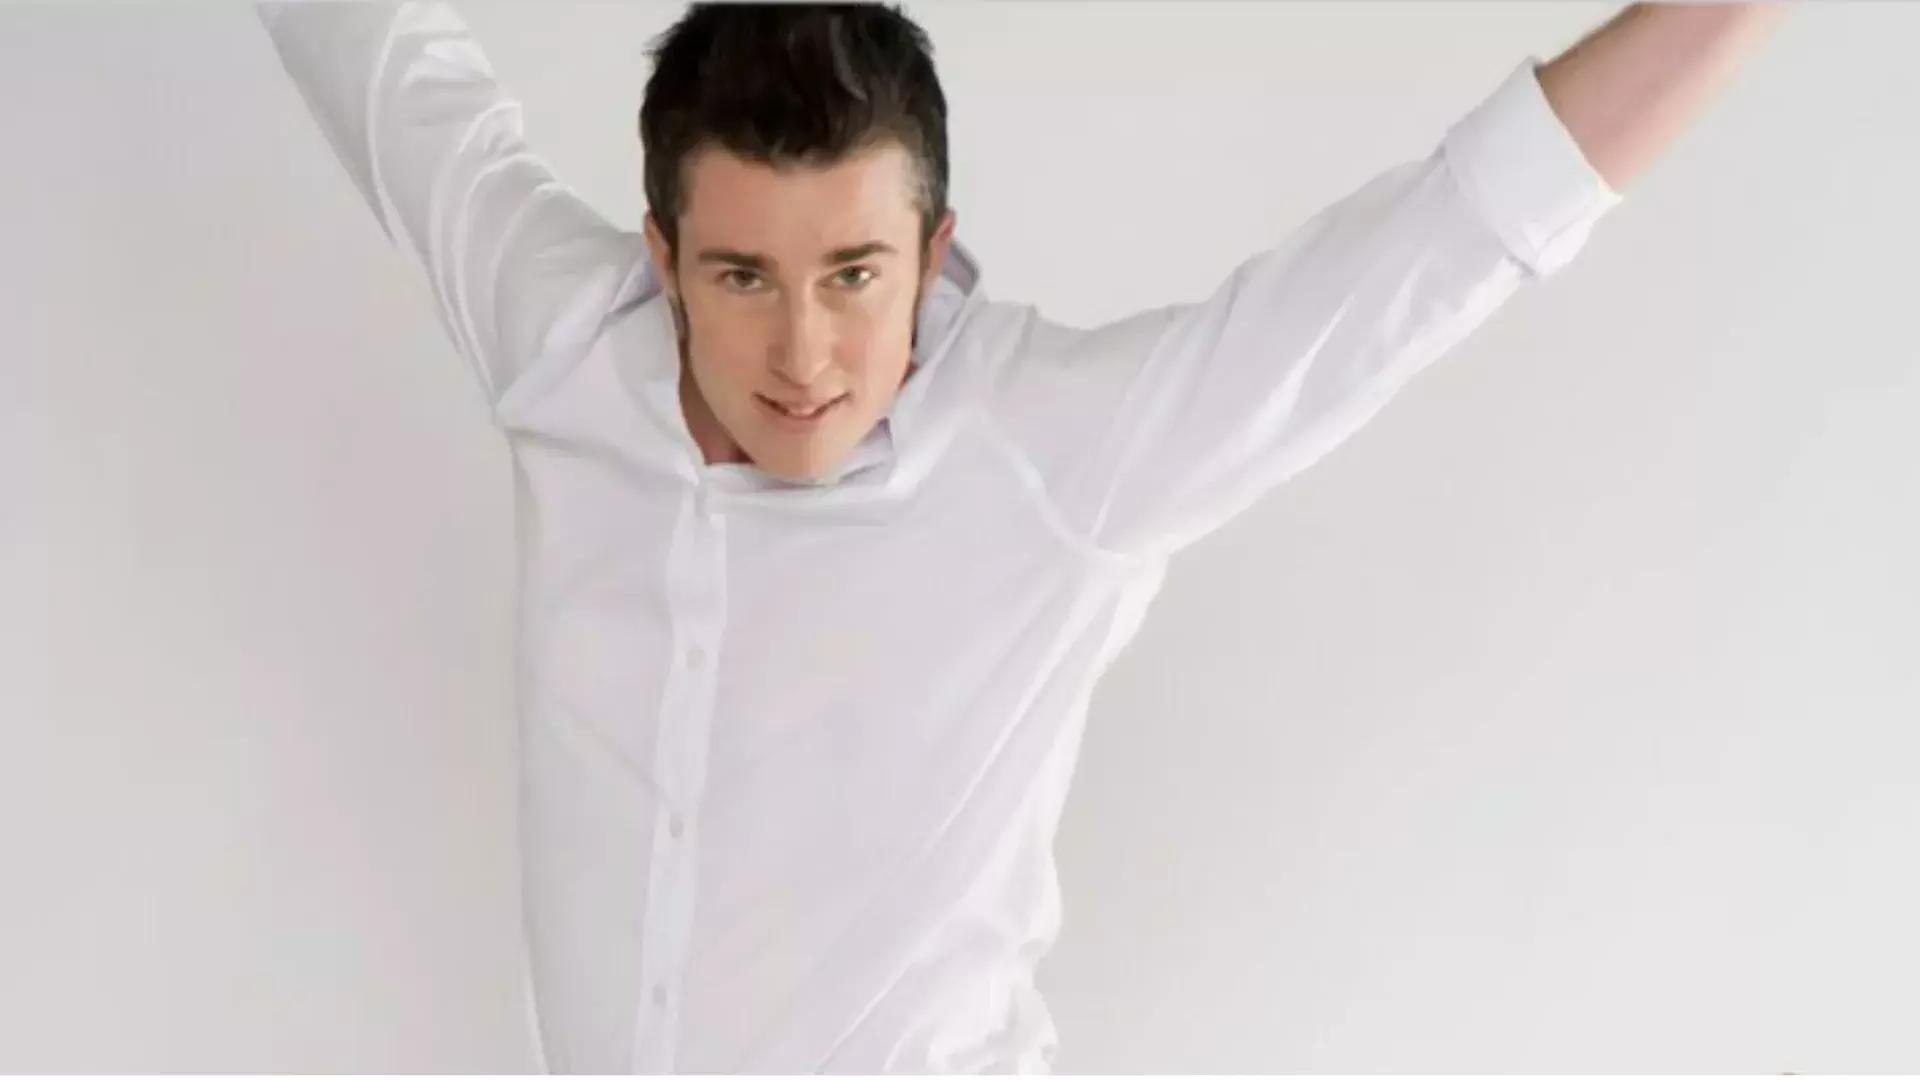 Image of person in white shirt jumping in frame